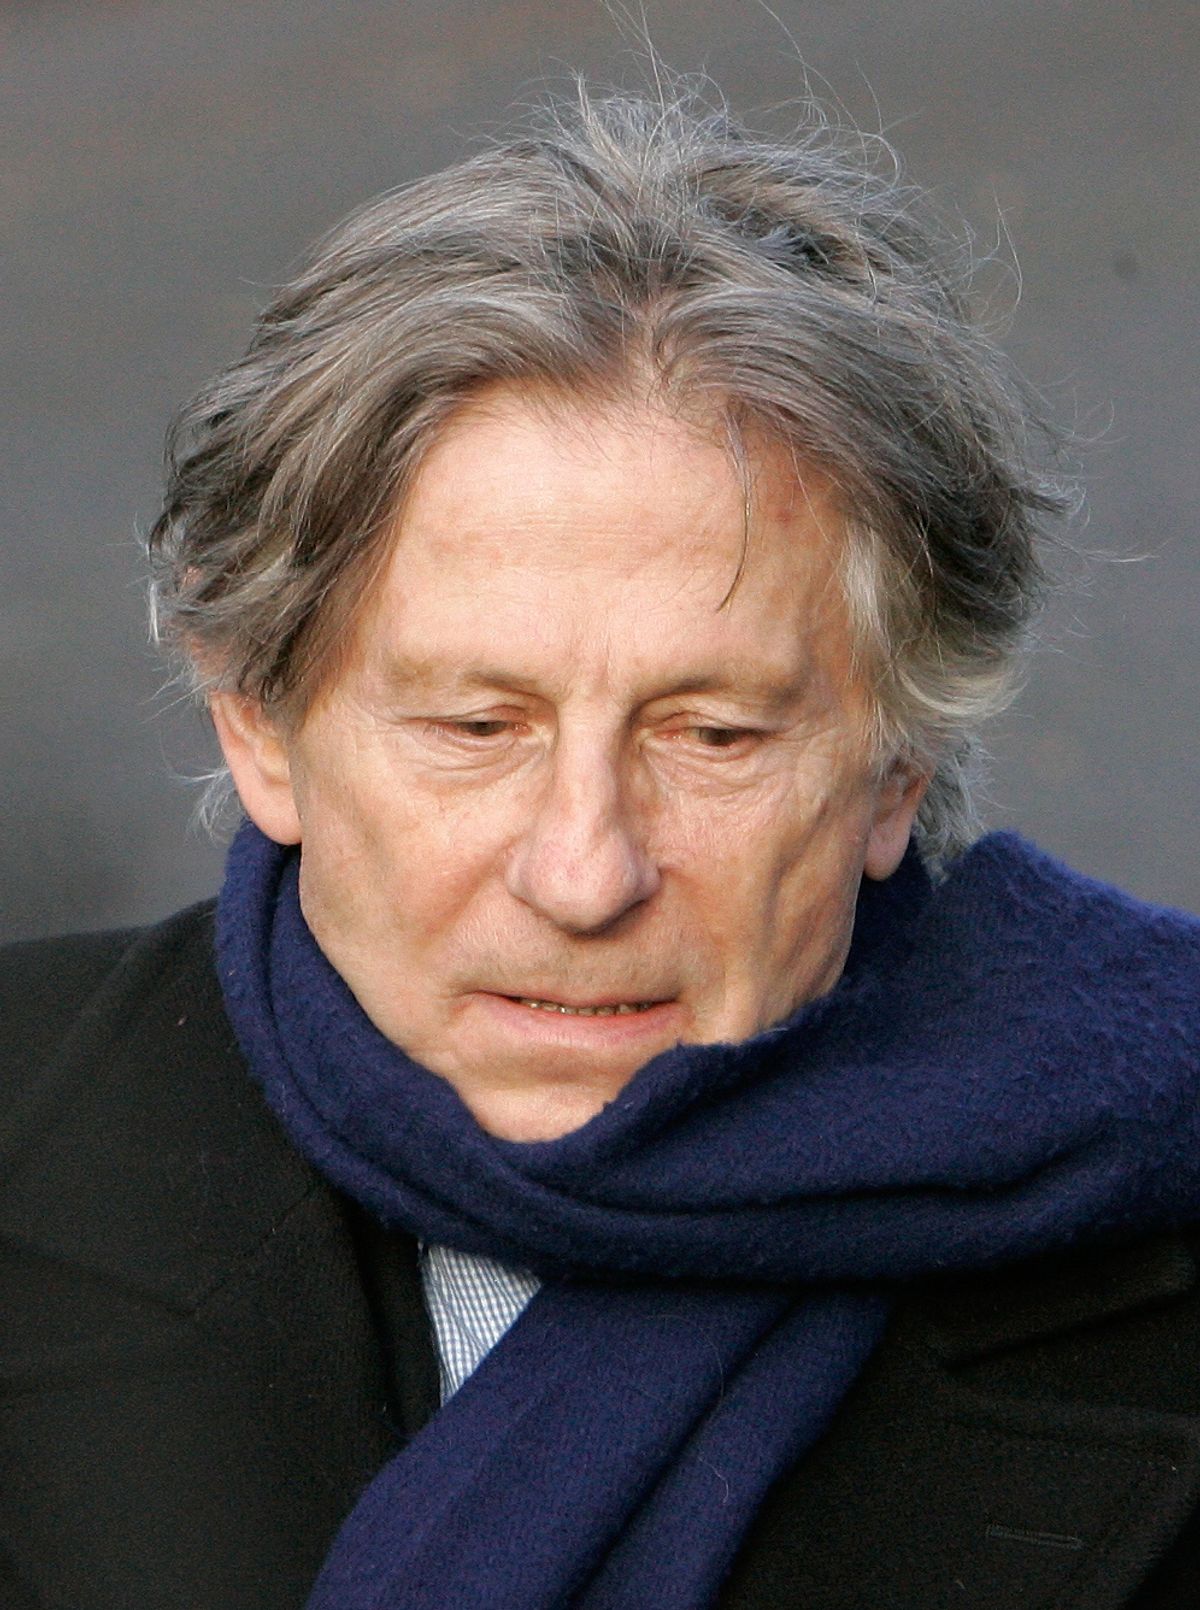 ** FILE ** Polish-born film director Roman Polanski during the burial ceremony for French film maker Claude Berri in Montrouge, outside Paris, in this Jan. 15, 2009 file photo. Organizers of the Zurich Film Festival say director Roman Polanski has been taken into custody on a 31-year-old U.S. arrest warrant. The organizers say Polanski was detained by police Saturday Sept. 26, 2009.   (AP Photo/Michel Euler, File) (Michel Euler)